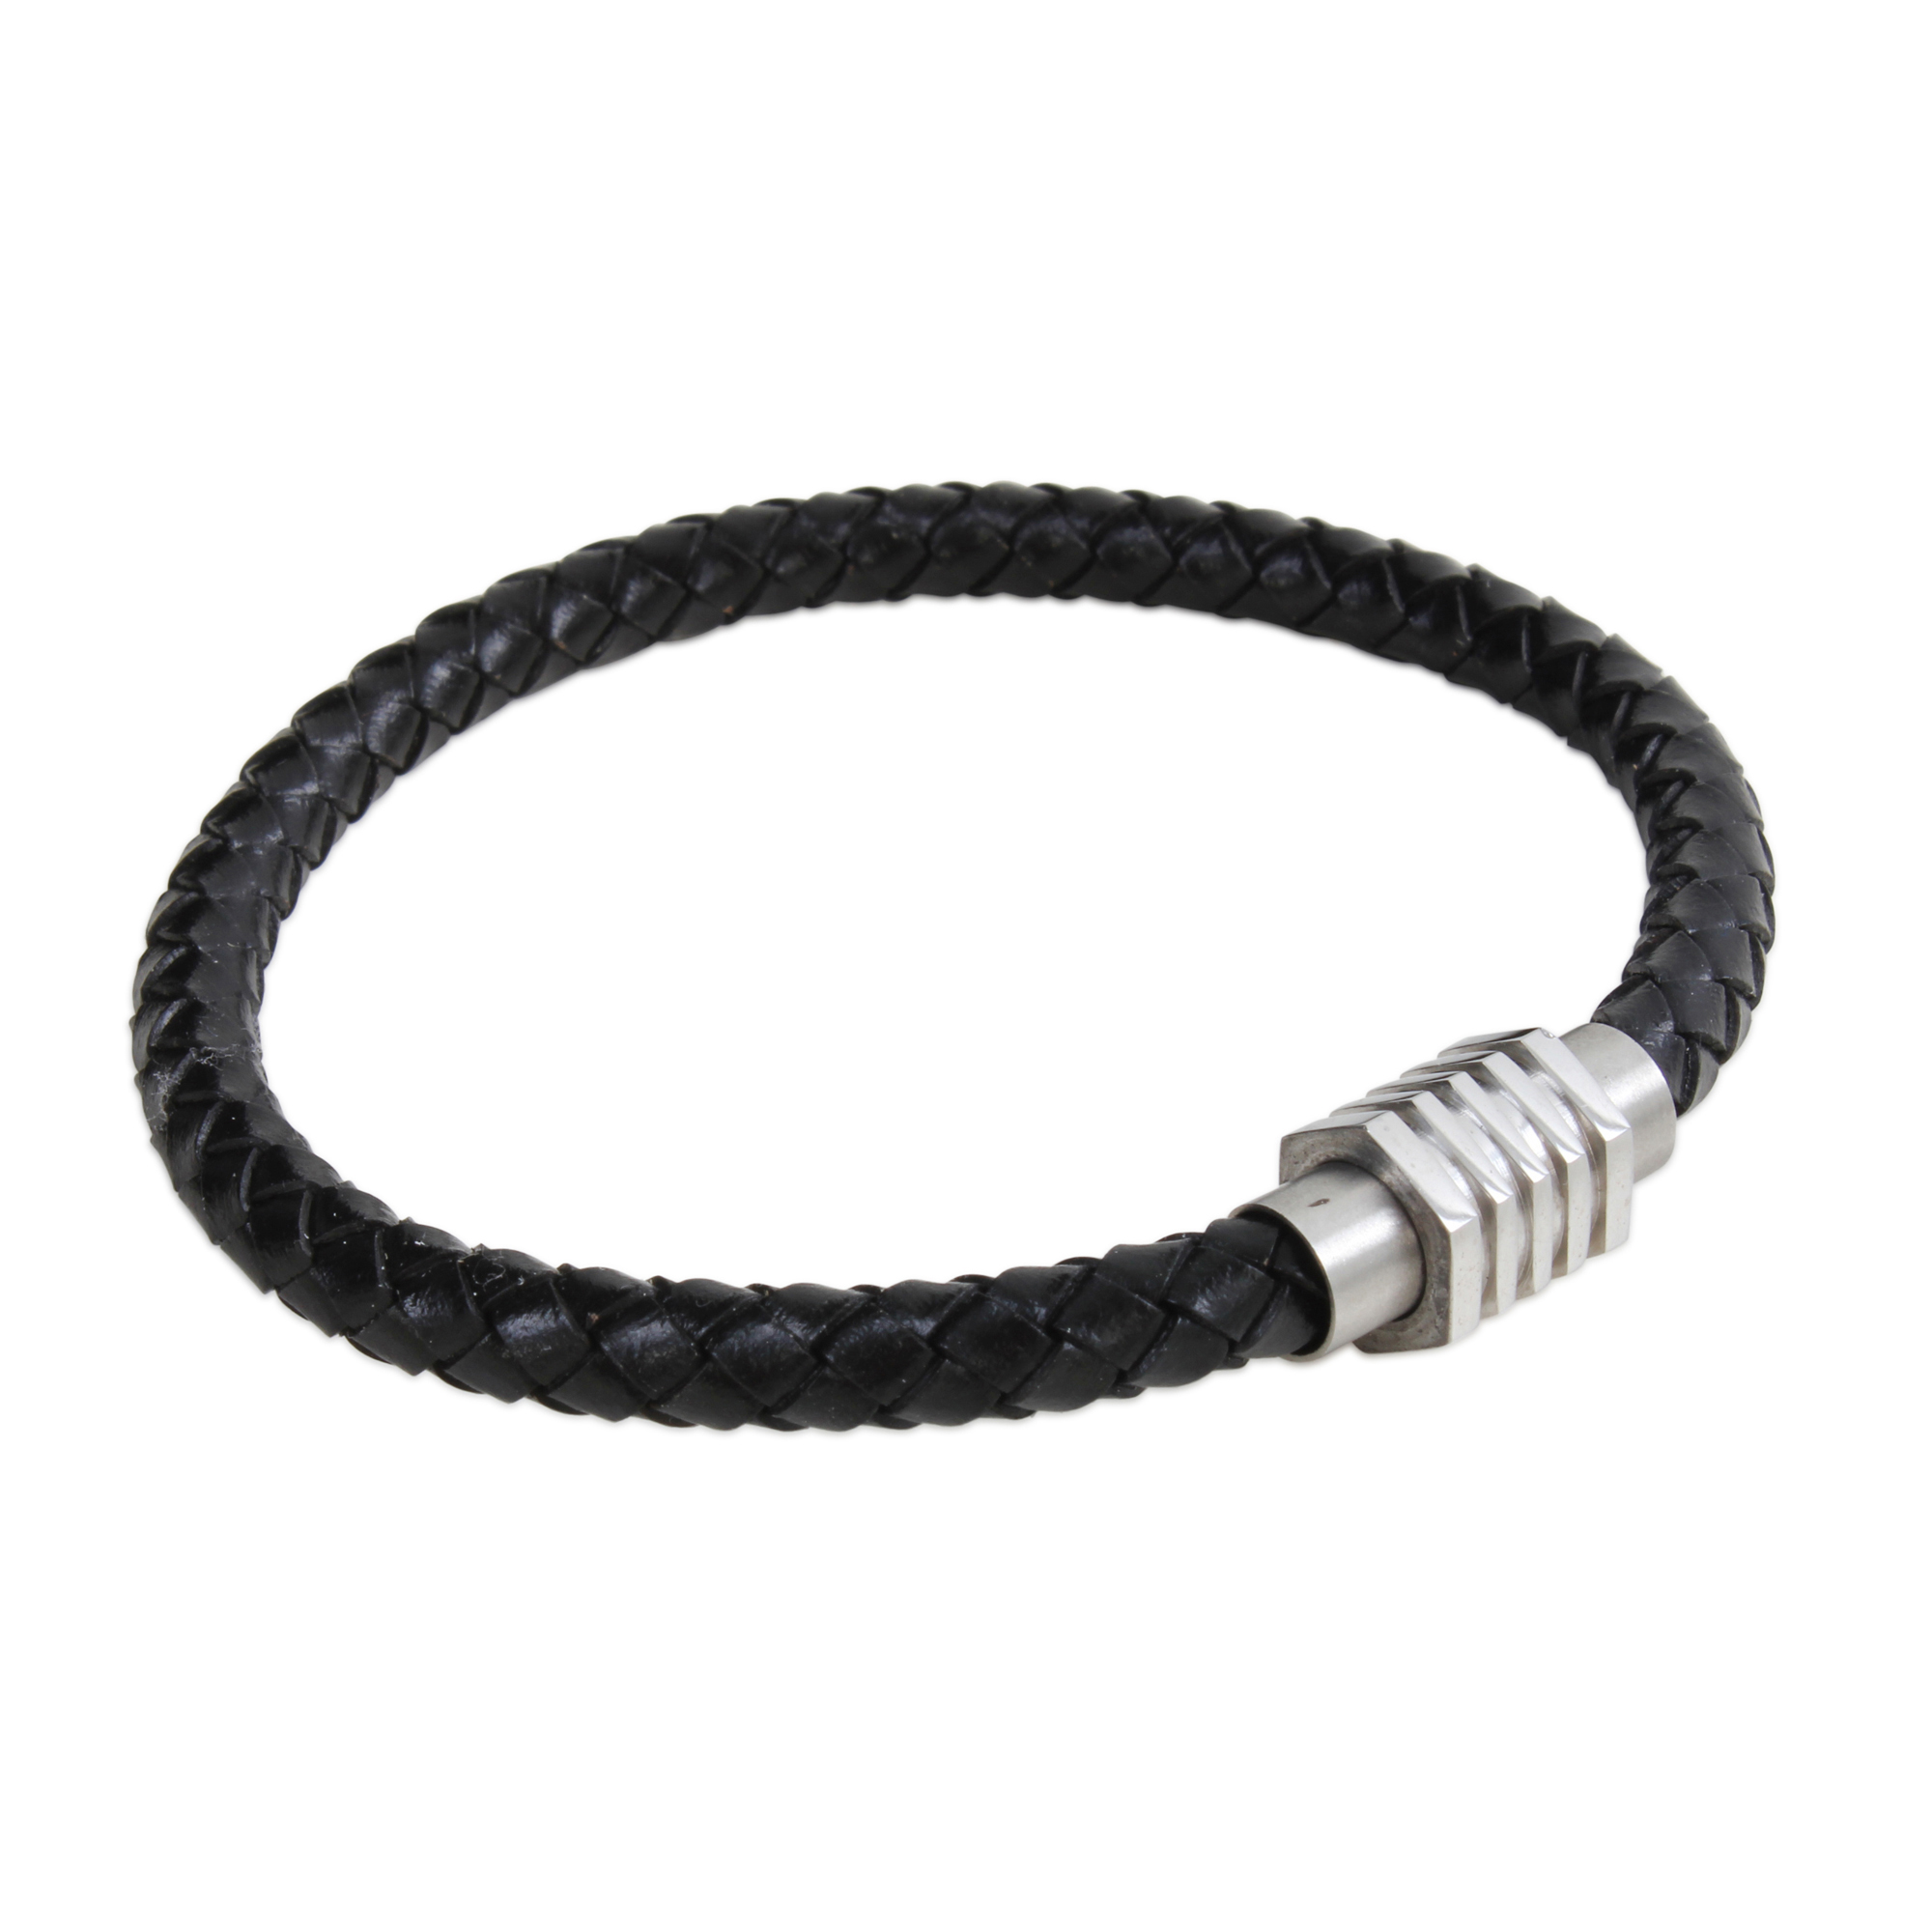 Black Leather Bracelet with Stainless Steel Ribbed Clasp - Dalaco